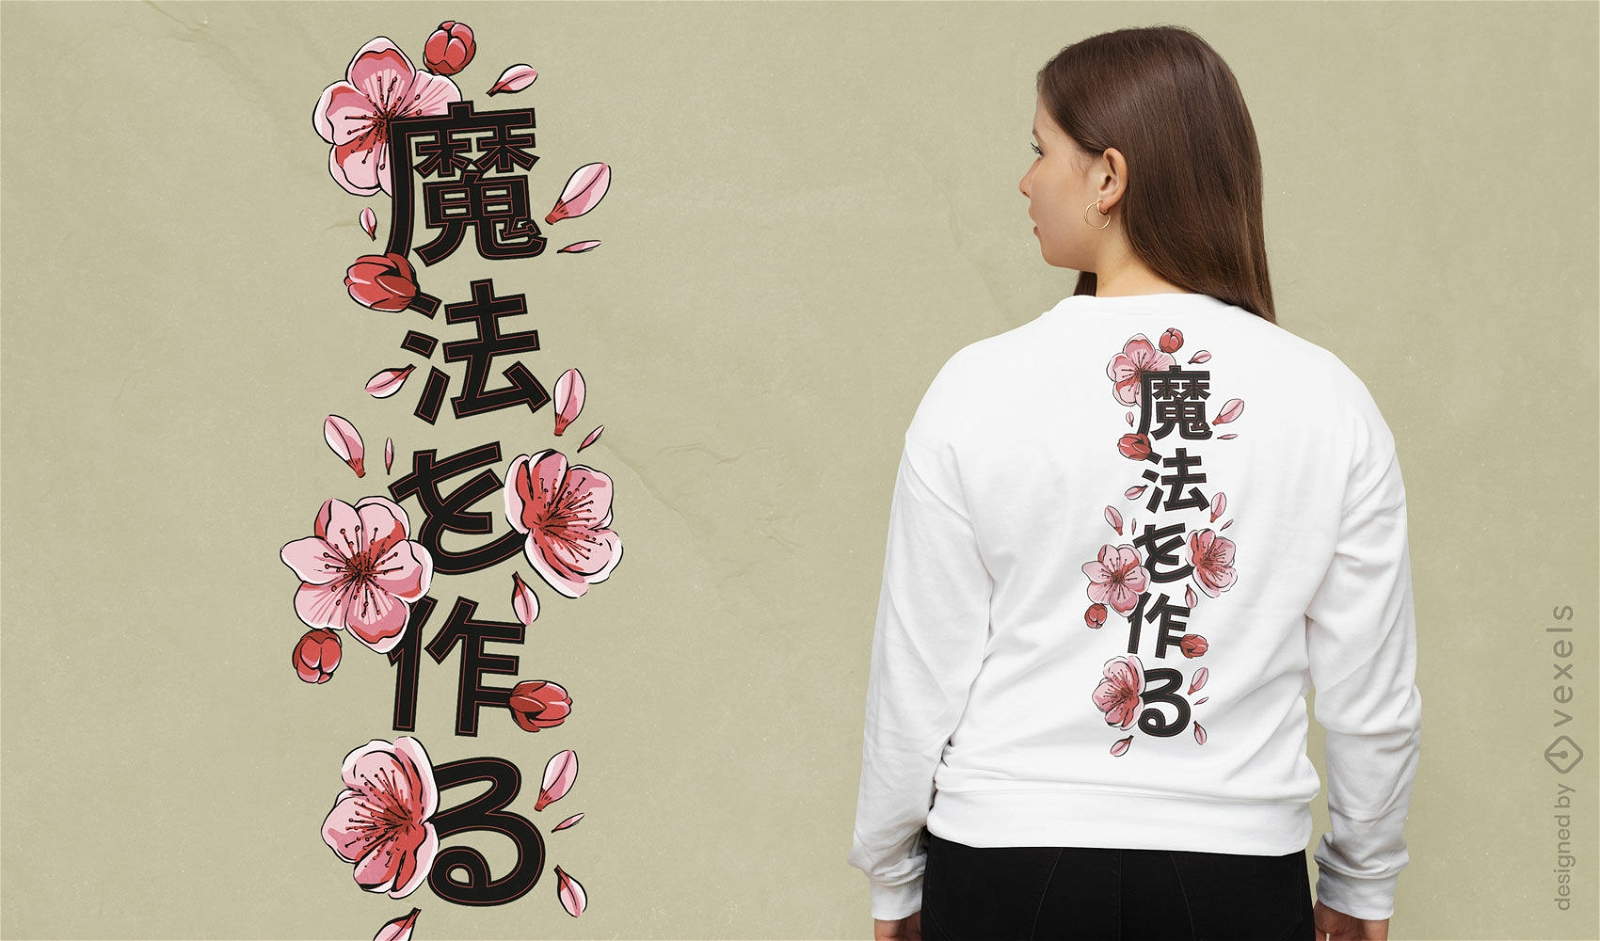 Floral japanese quote t-shirt design